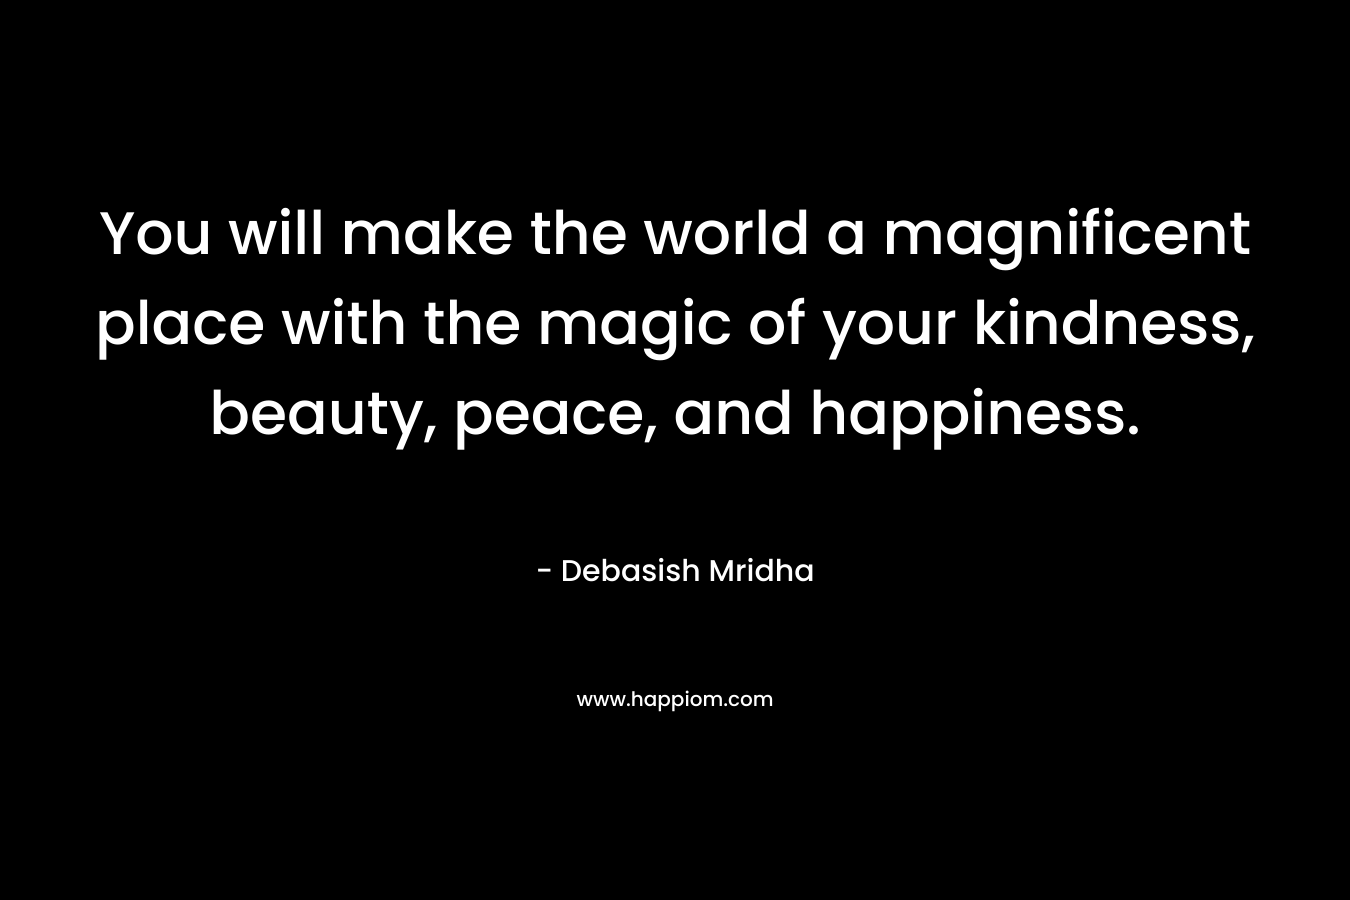 You will make the world a magnificent place with the magic of your kindness, beauty, peace, and happiness.